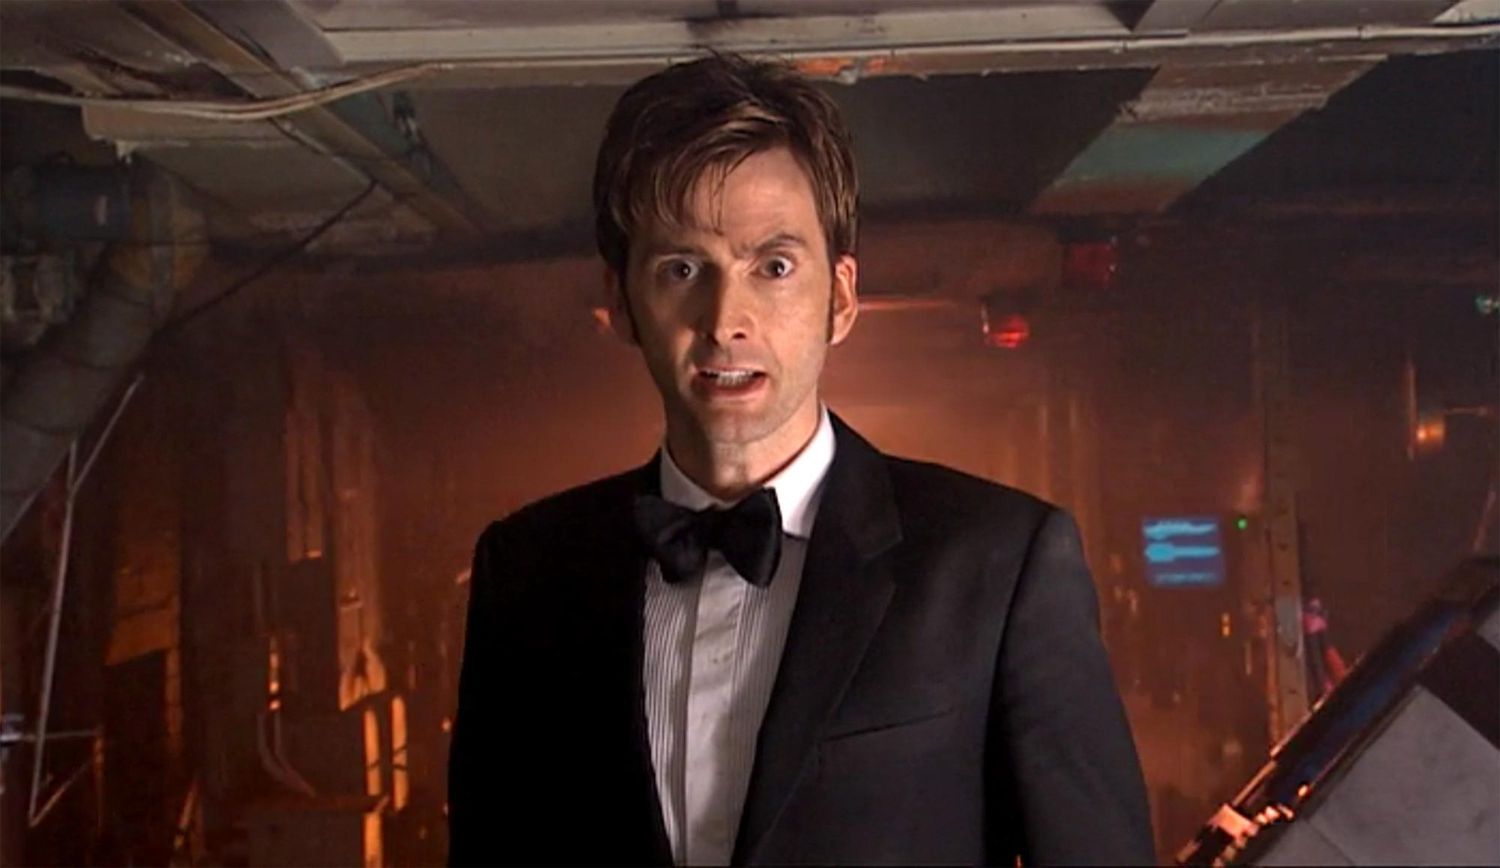 23. I'm the Doctor. (From The Voyage of the Damned)